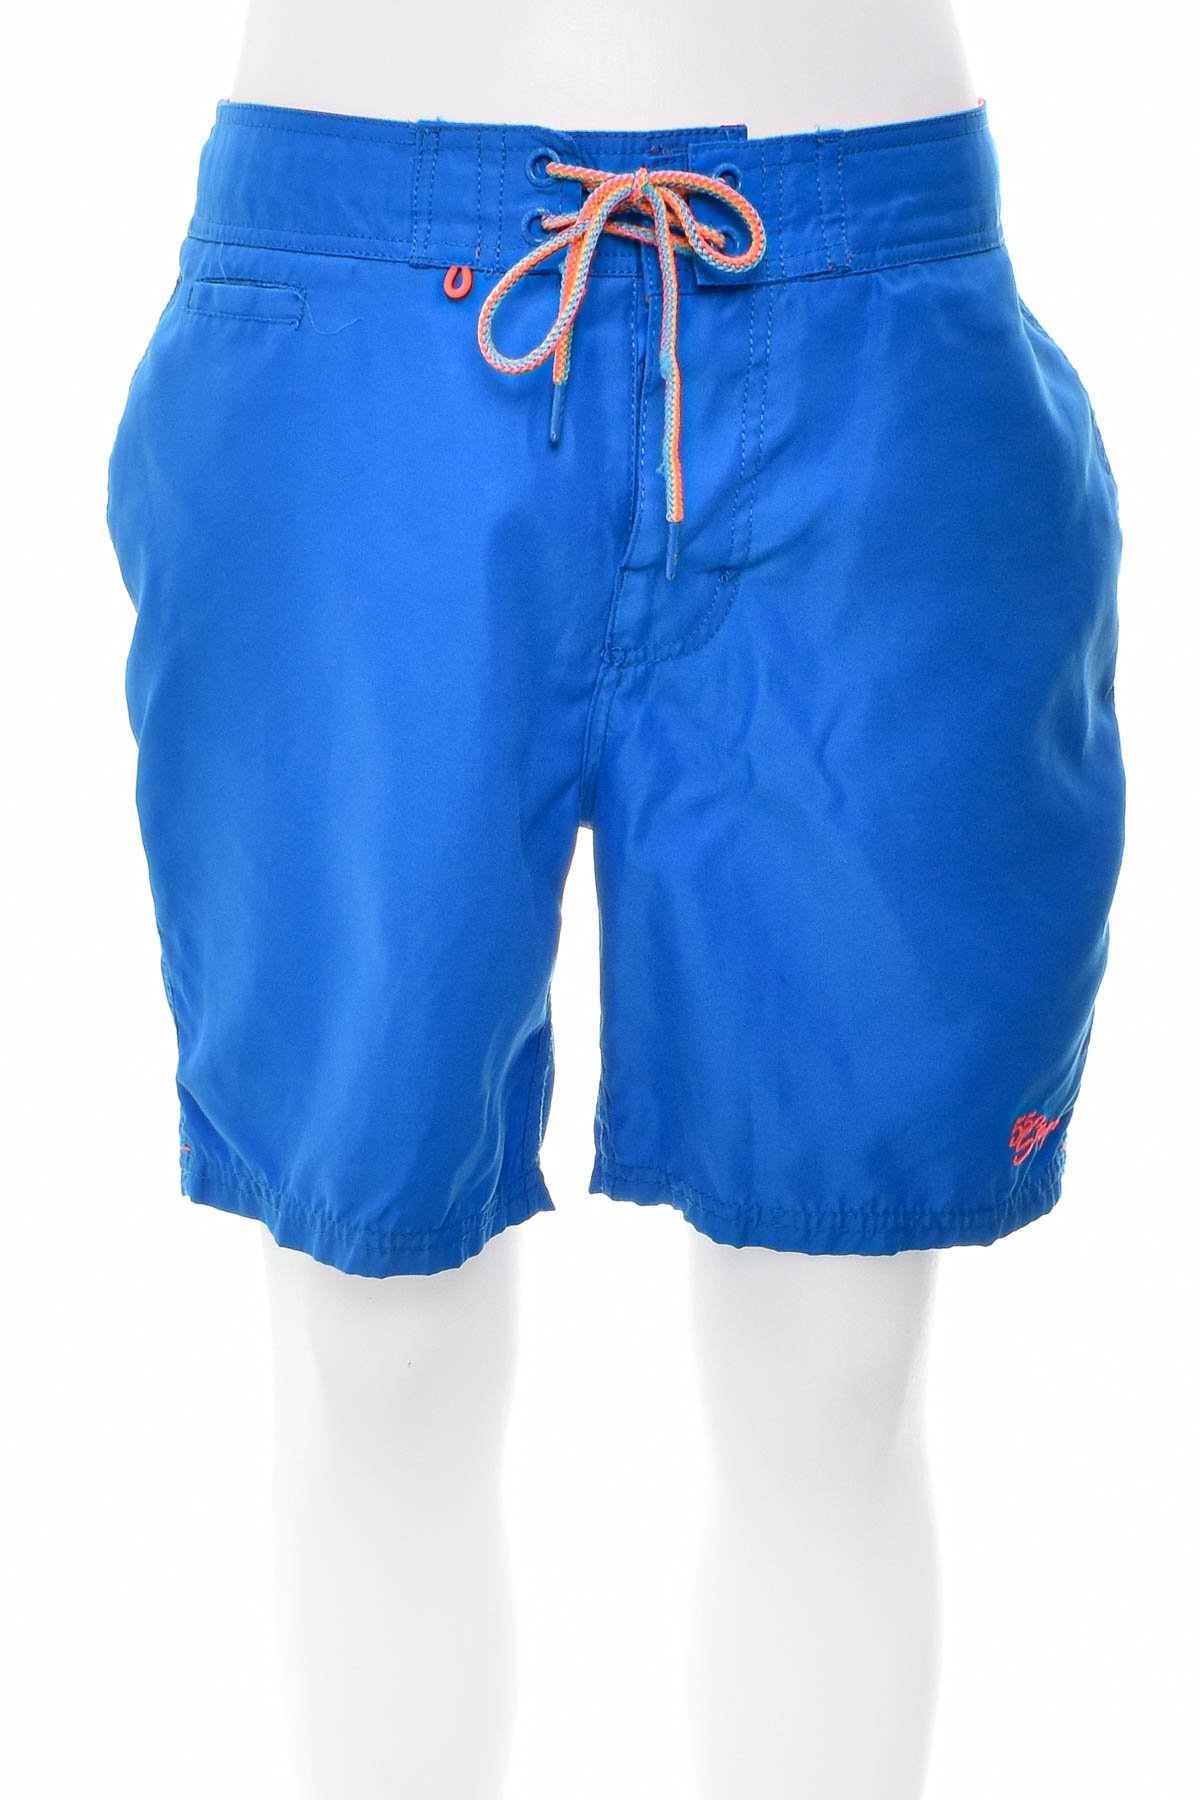 Men's shorts - 55 Stage - 0